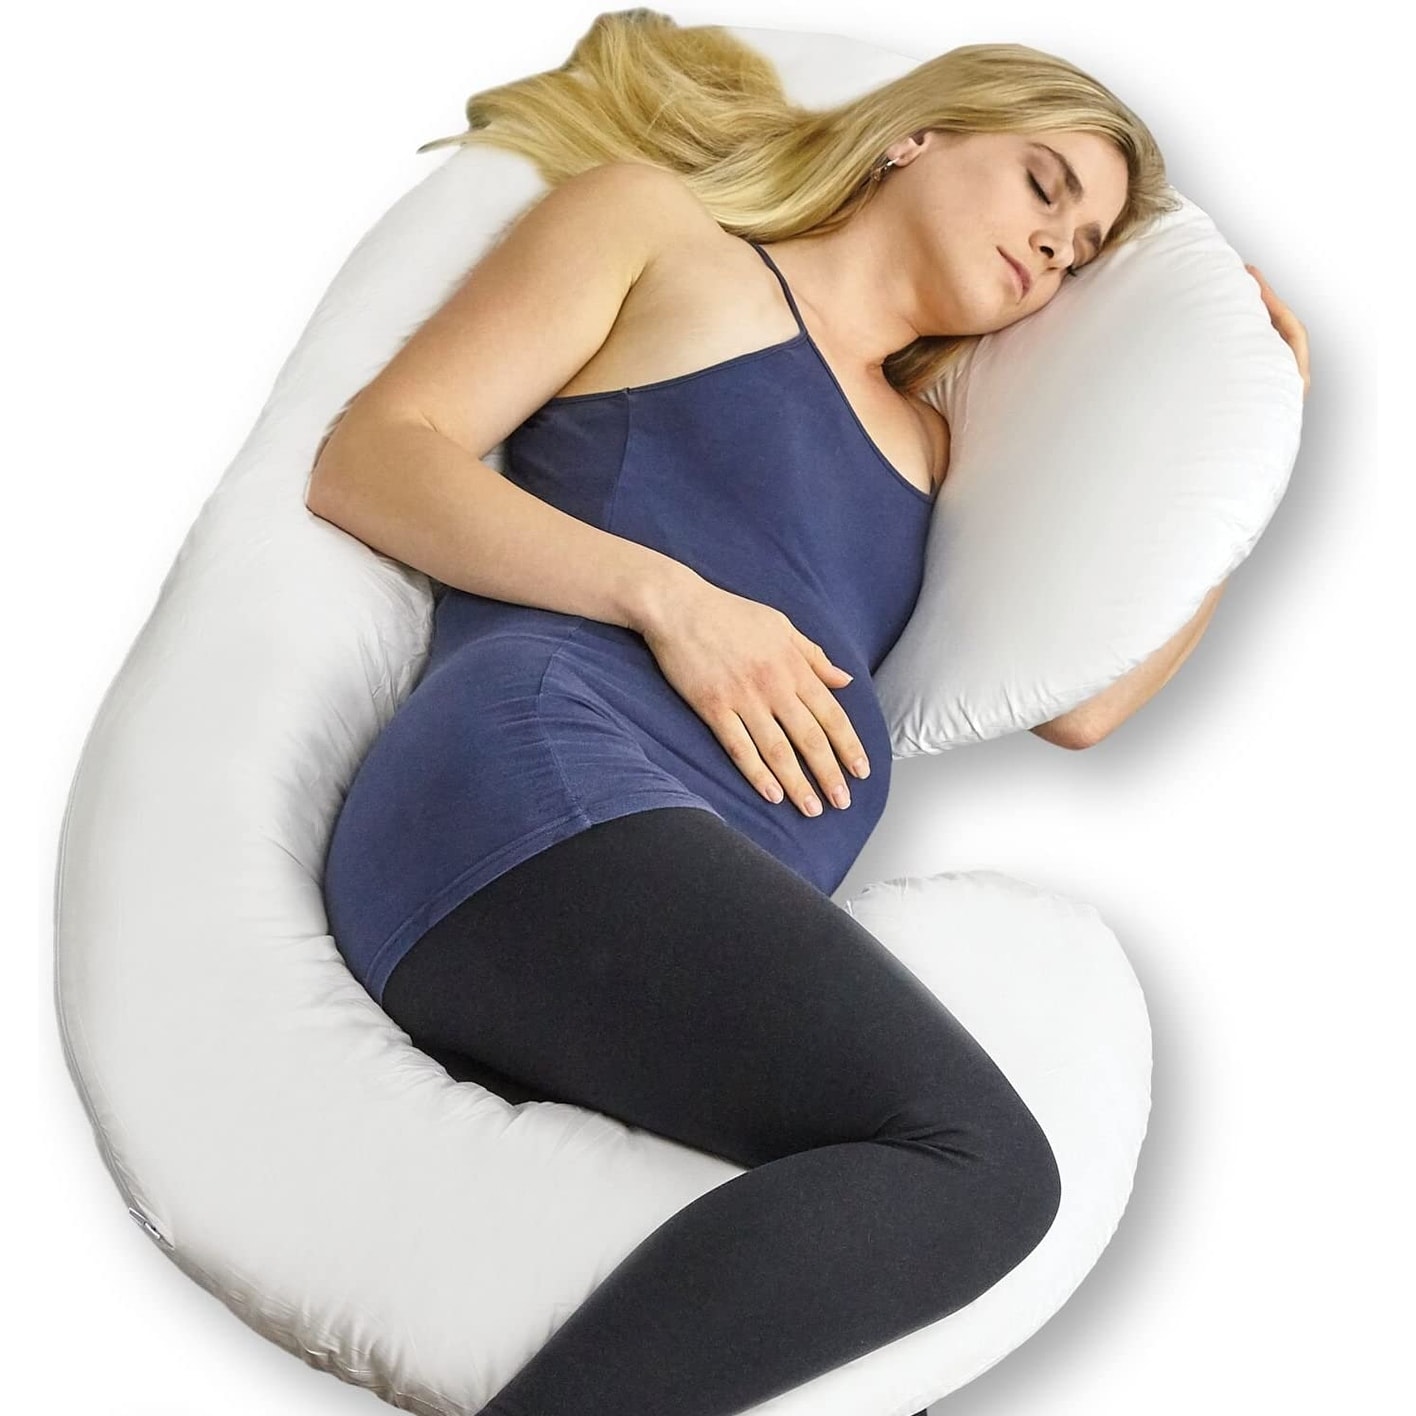 https://ak1.ostkcdn.com/images/products/is/images/direct/8a7d4b5da83de13b110be11d7c366a145783aa79/COMFYSURE-Full-Body-Pregnancy-Pillow---58%22-C-Shaped-Maternity-Pillow.jpg